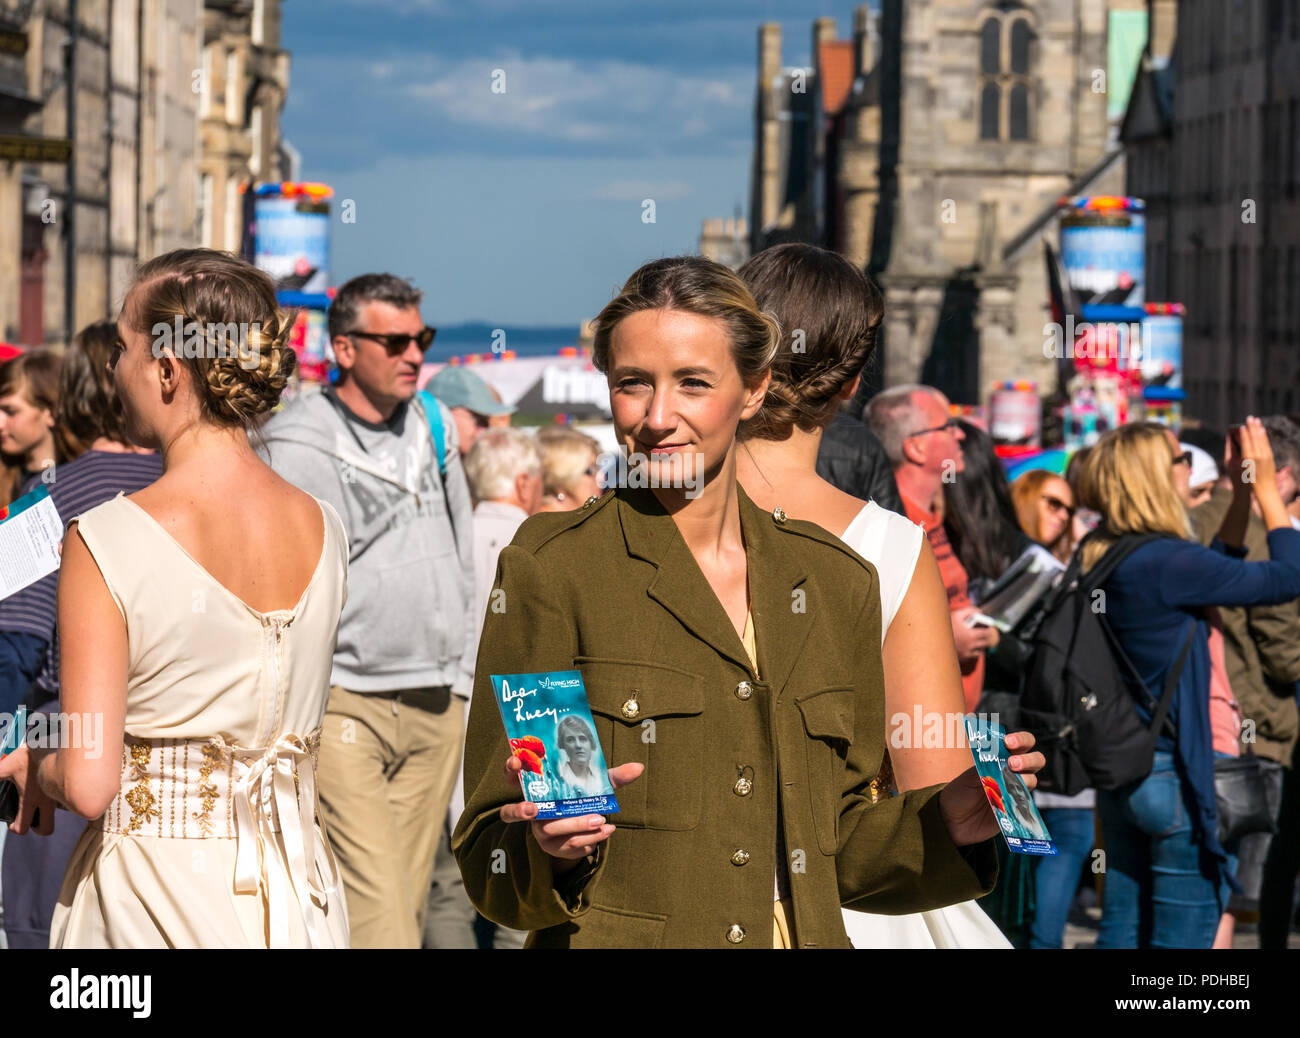 Edinburgh, Scotland, UK. 9th August 2018. Edinburgh Fringe Festival, Royal Mile, Edinburgh, Scotland, United Kingdom. On a sunny festival day the Virgin Money sponsored street festival is packed with people and fringe performers. A group of pretty young women dressed in World War II era costumes hand out flyers for their Fringe Show called Dear Lucy Stock Photo